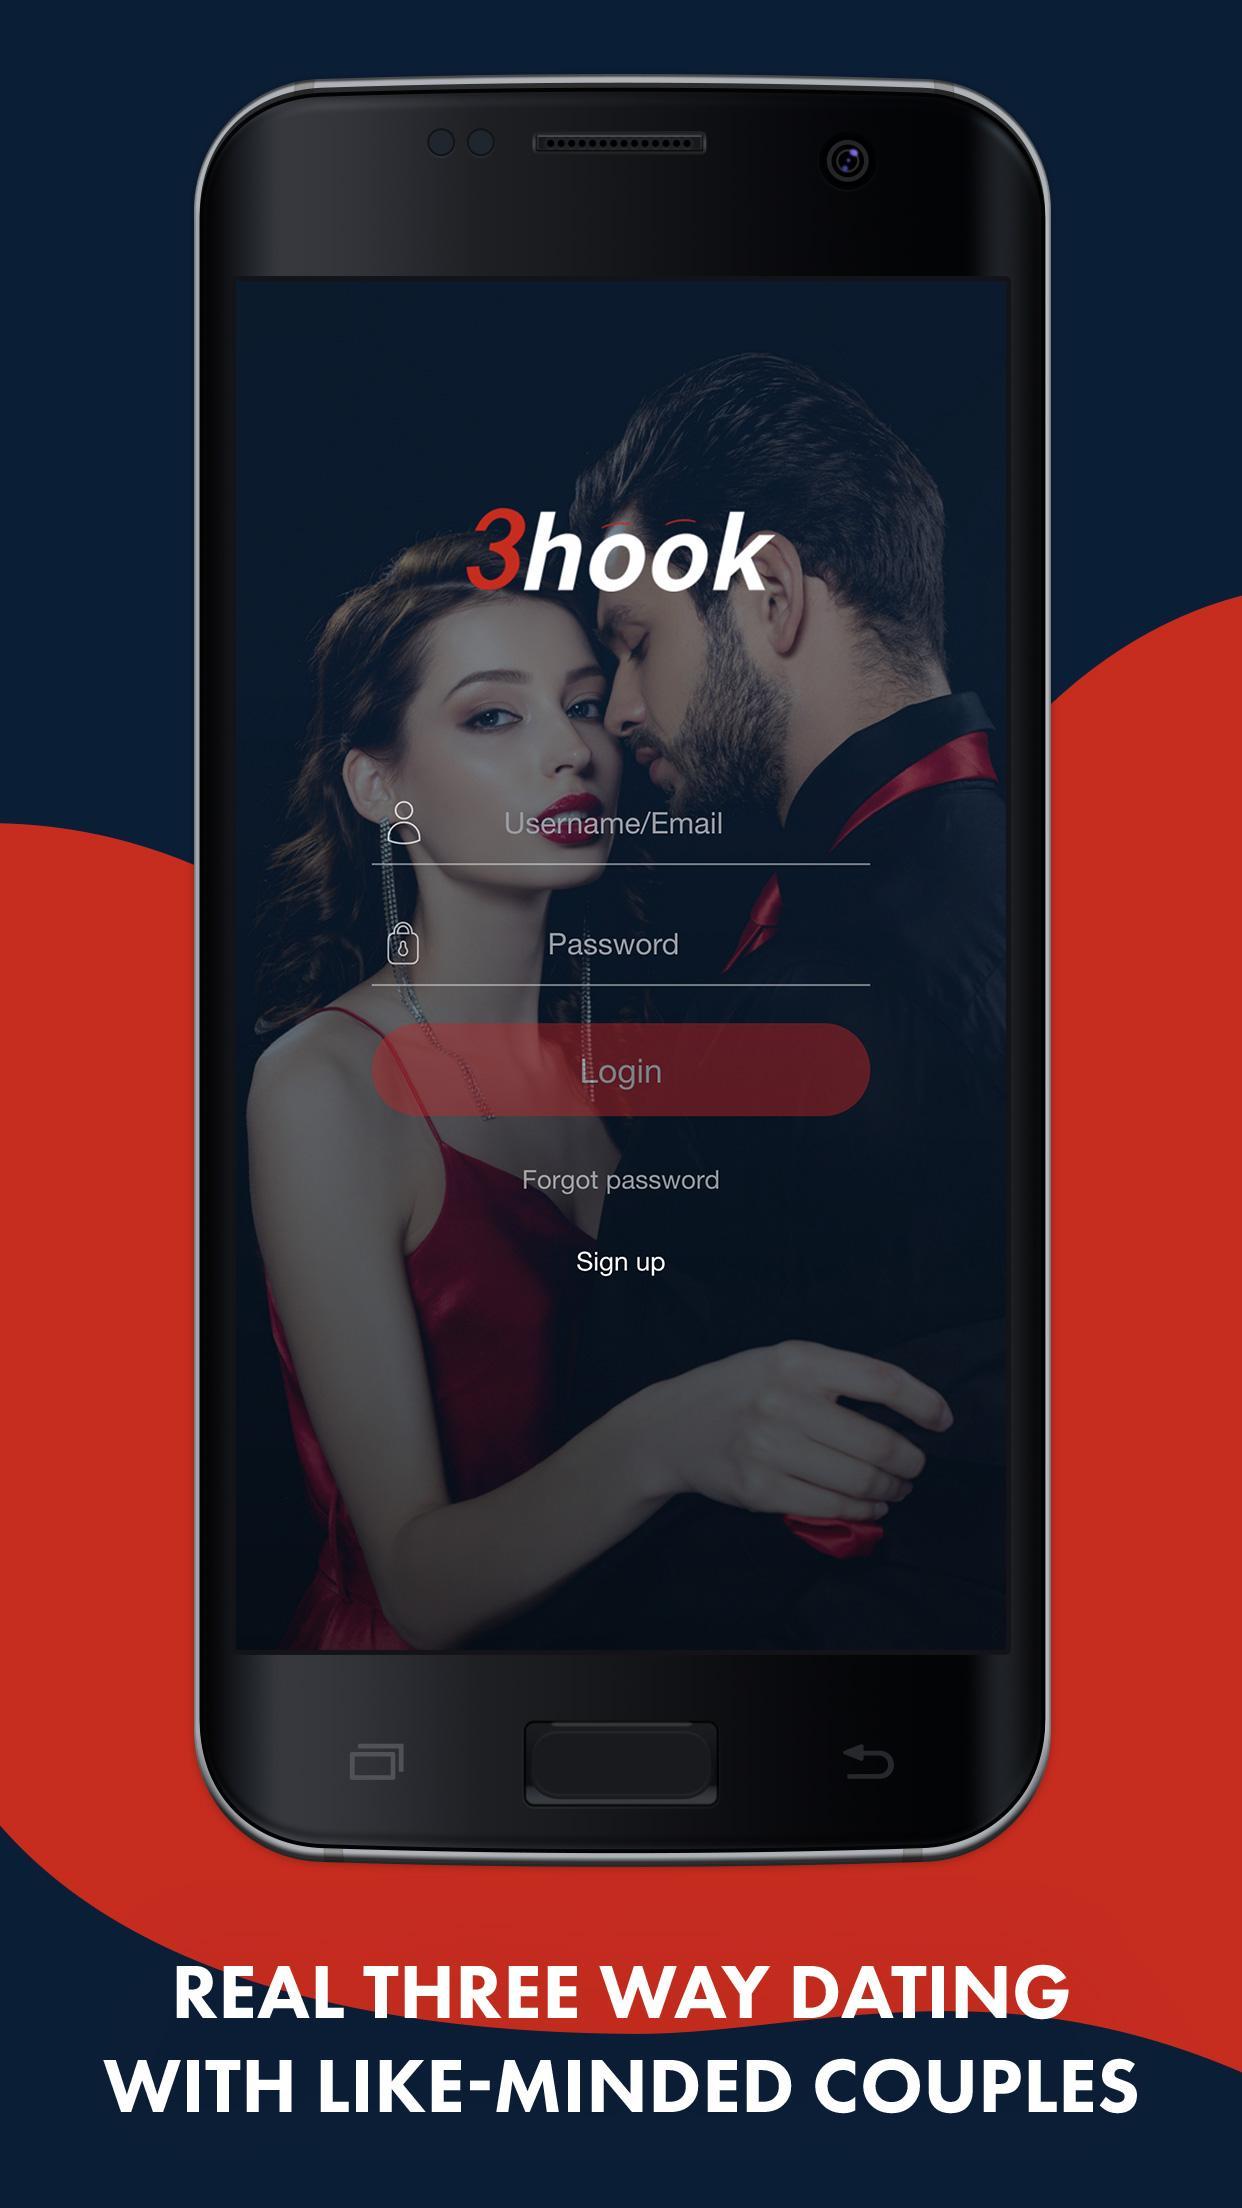 Threesome Dating For Swingers & Bisexual: 3Hook 2.4.2 Screenshot 1